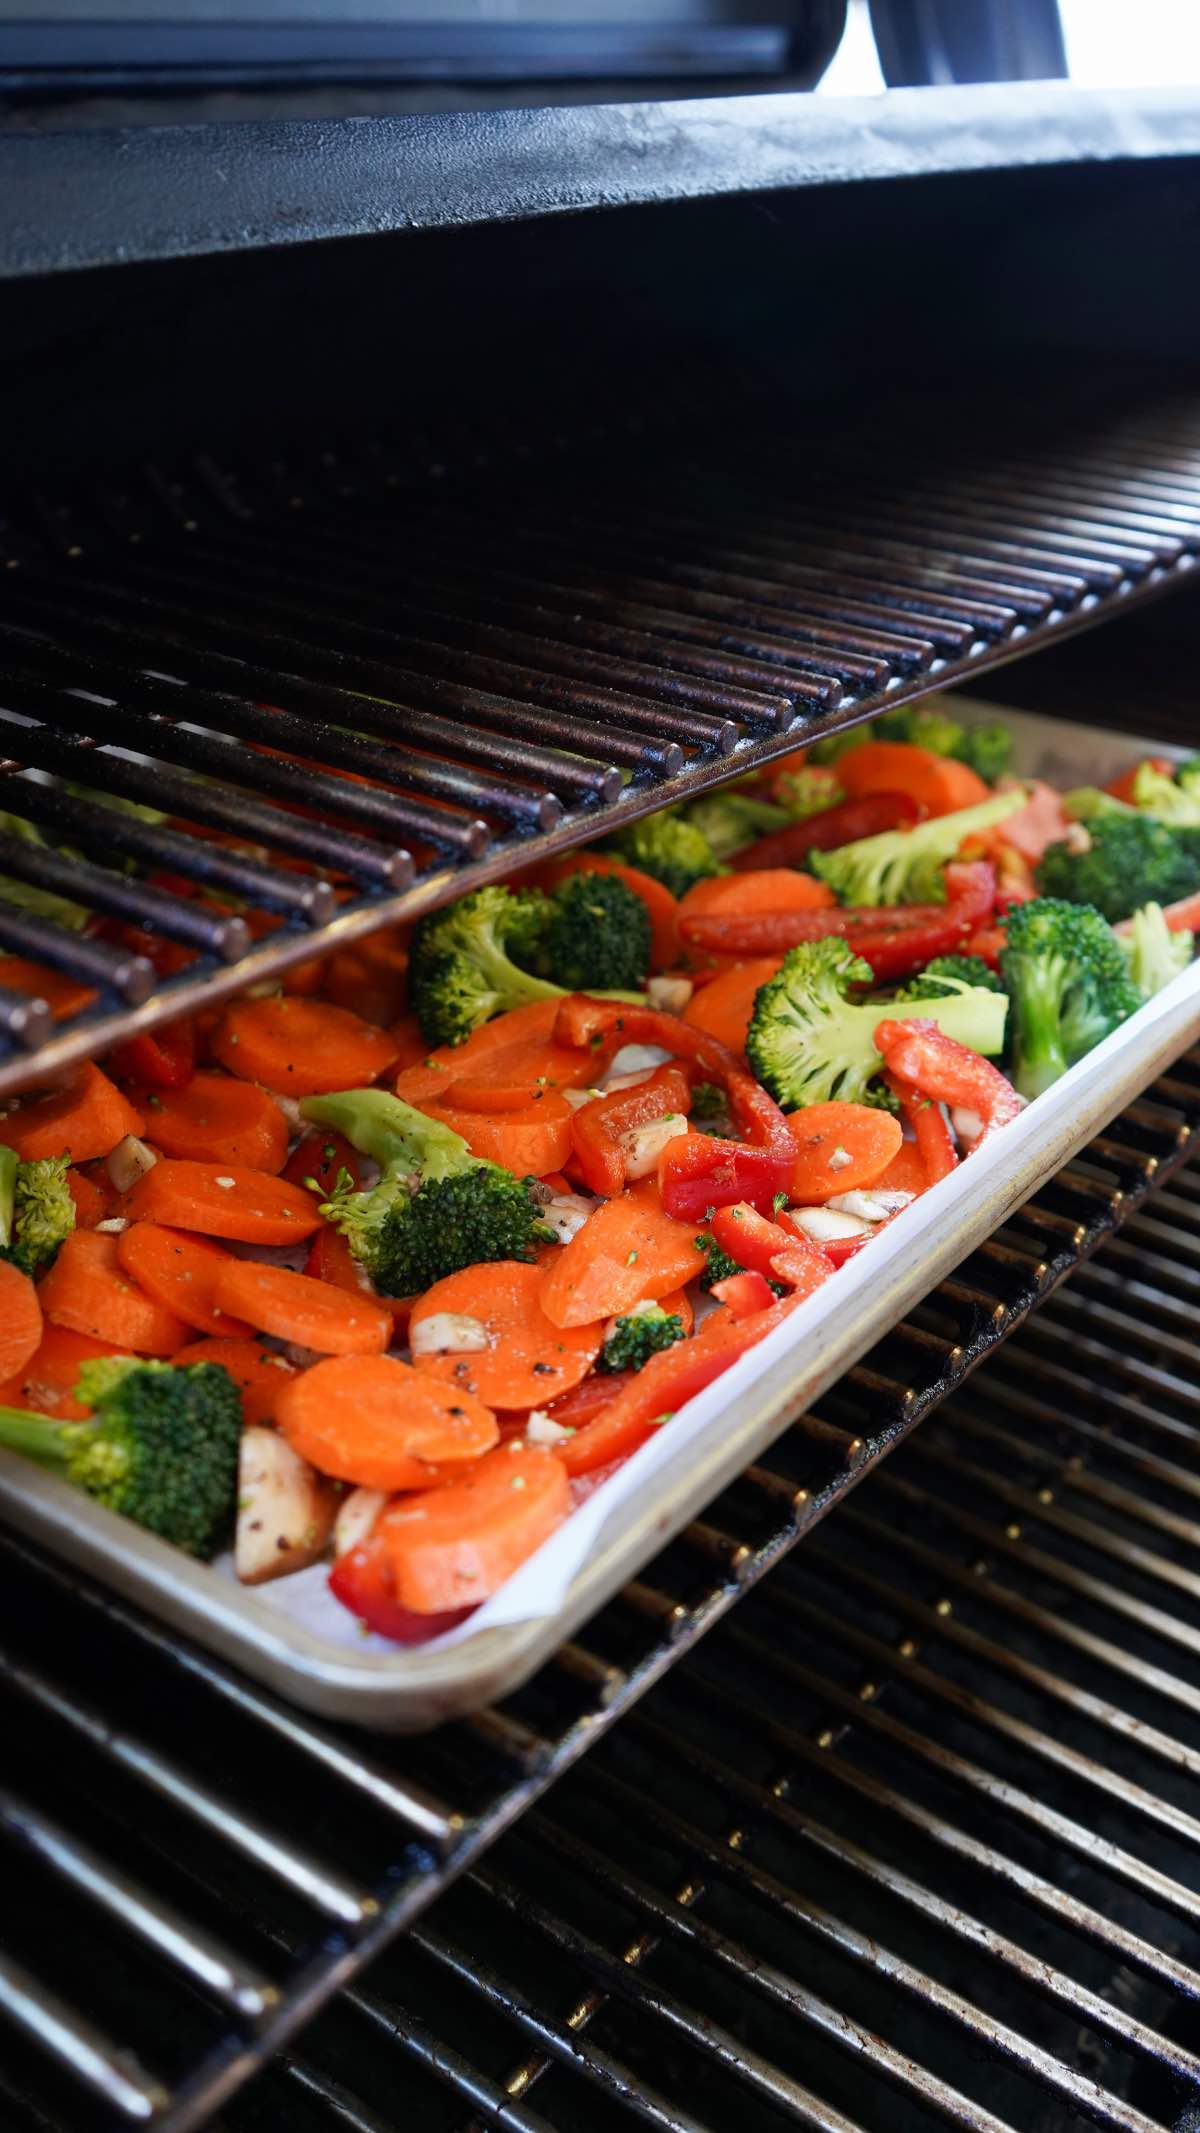 Smoked Vegetables in smoker during cook. 